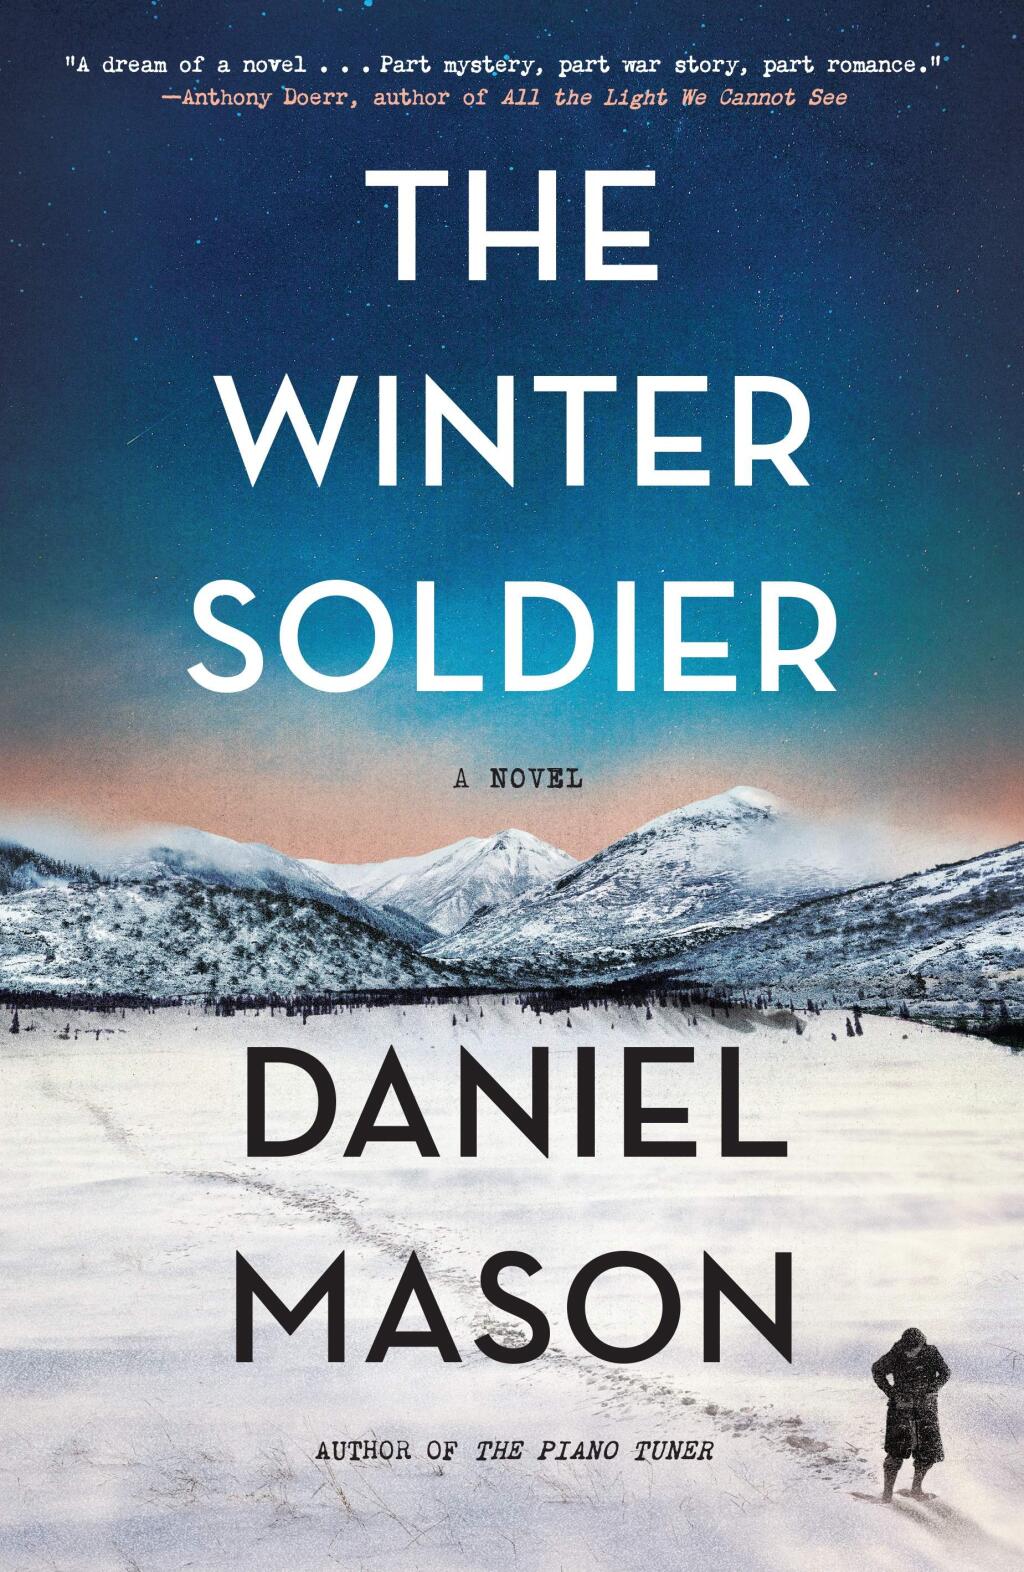 THE WINTER SOLDIER - Daniel Mason's gripping novel about doctors in WWI is this week's No. 1 book.